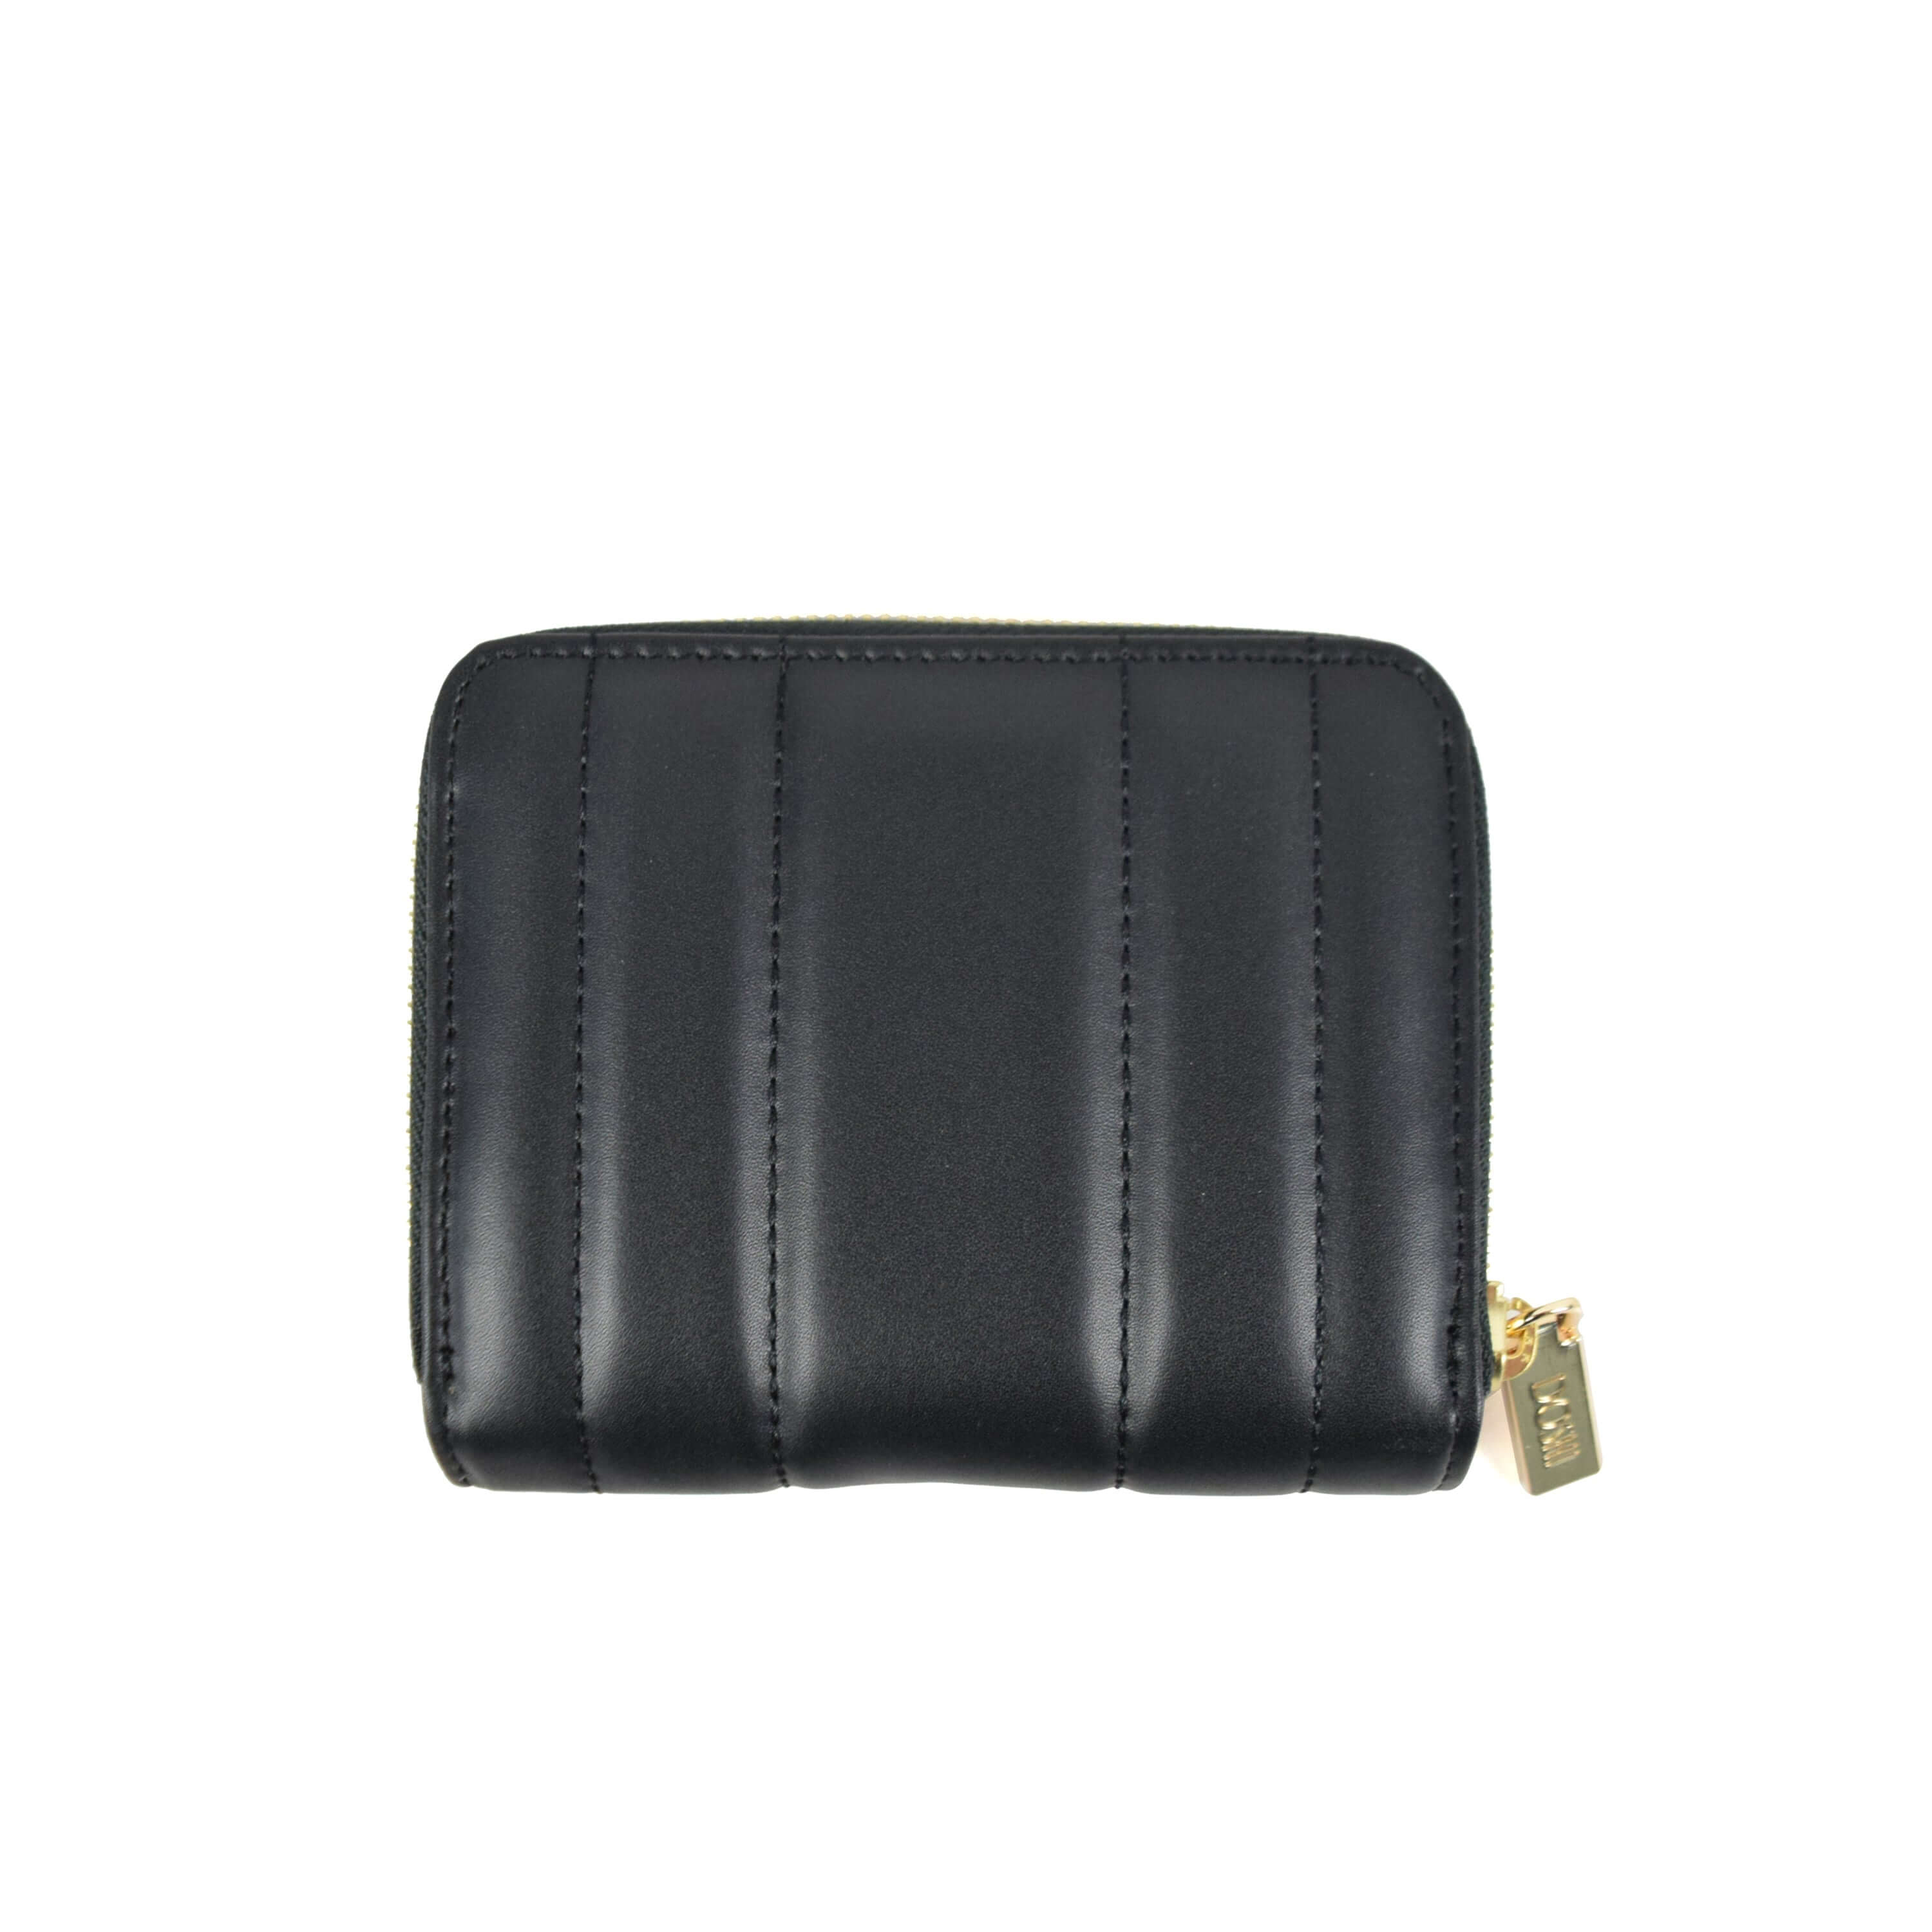 DKNY Black Quilted Leather Zip Around Wallet Dkny